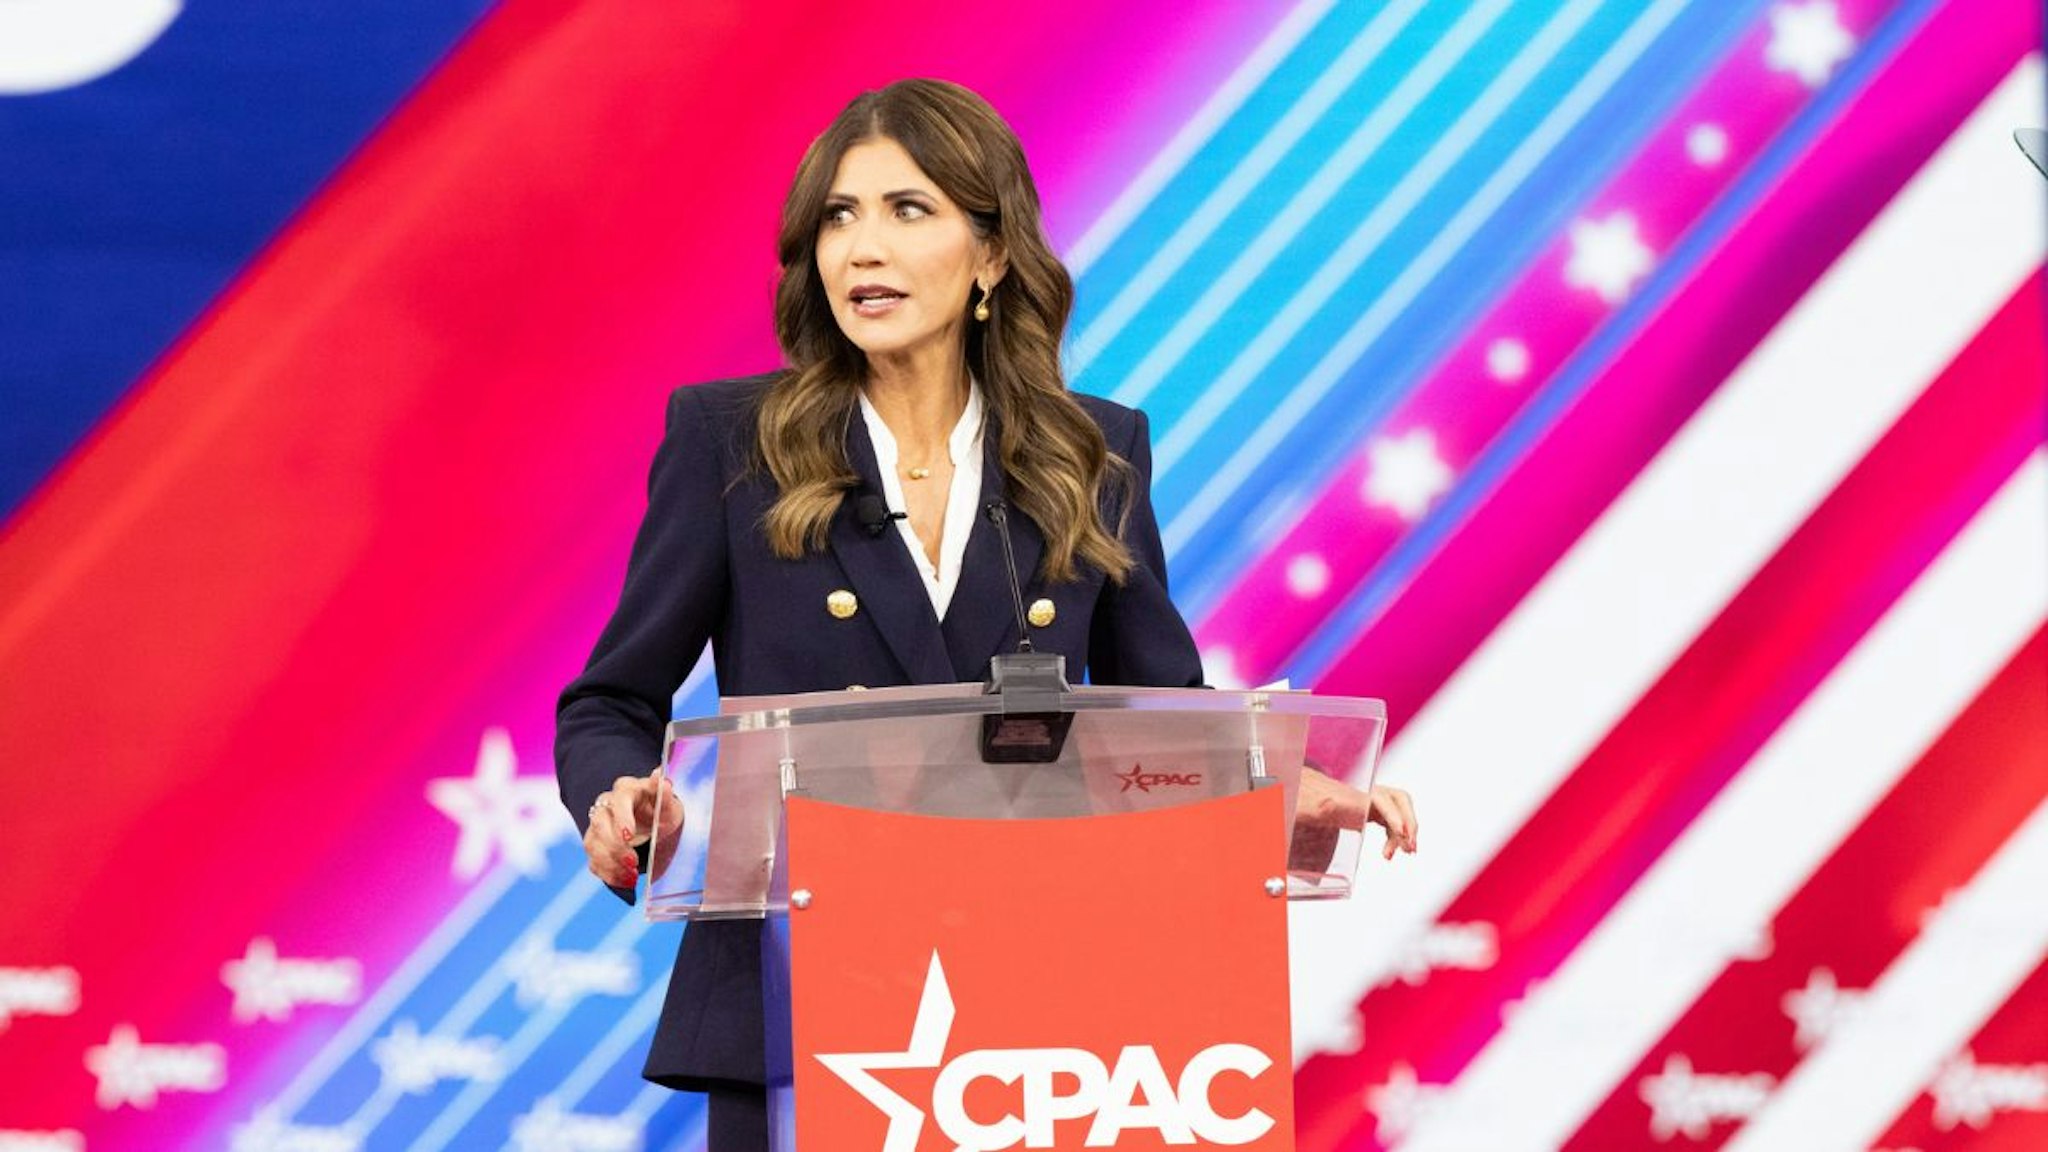 Kristi Noem, governor of South Dakota, speaks during the Conservative Political Action Conference (CPAC) in Orlando, Florida, U.S., on Friday, Feb. 25, 2022.